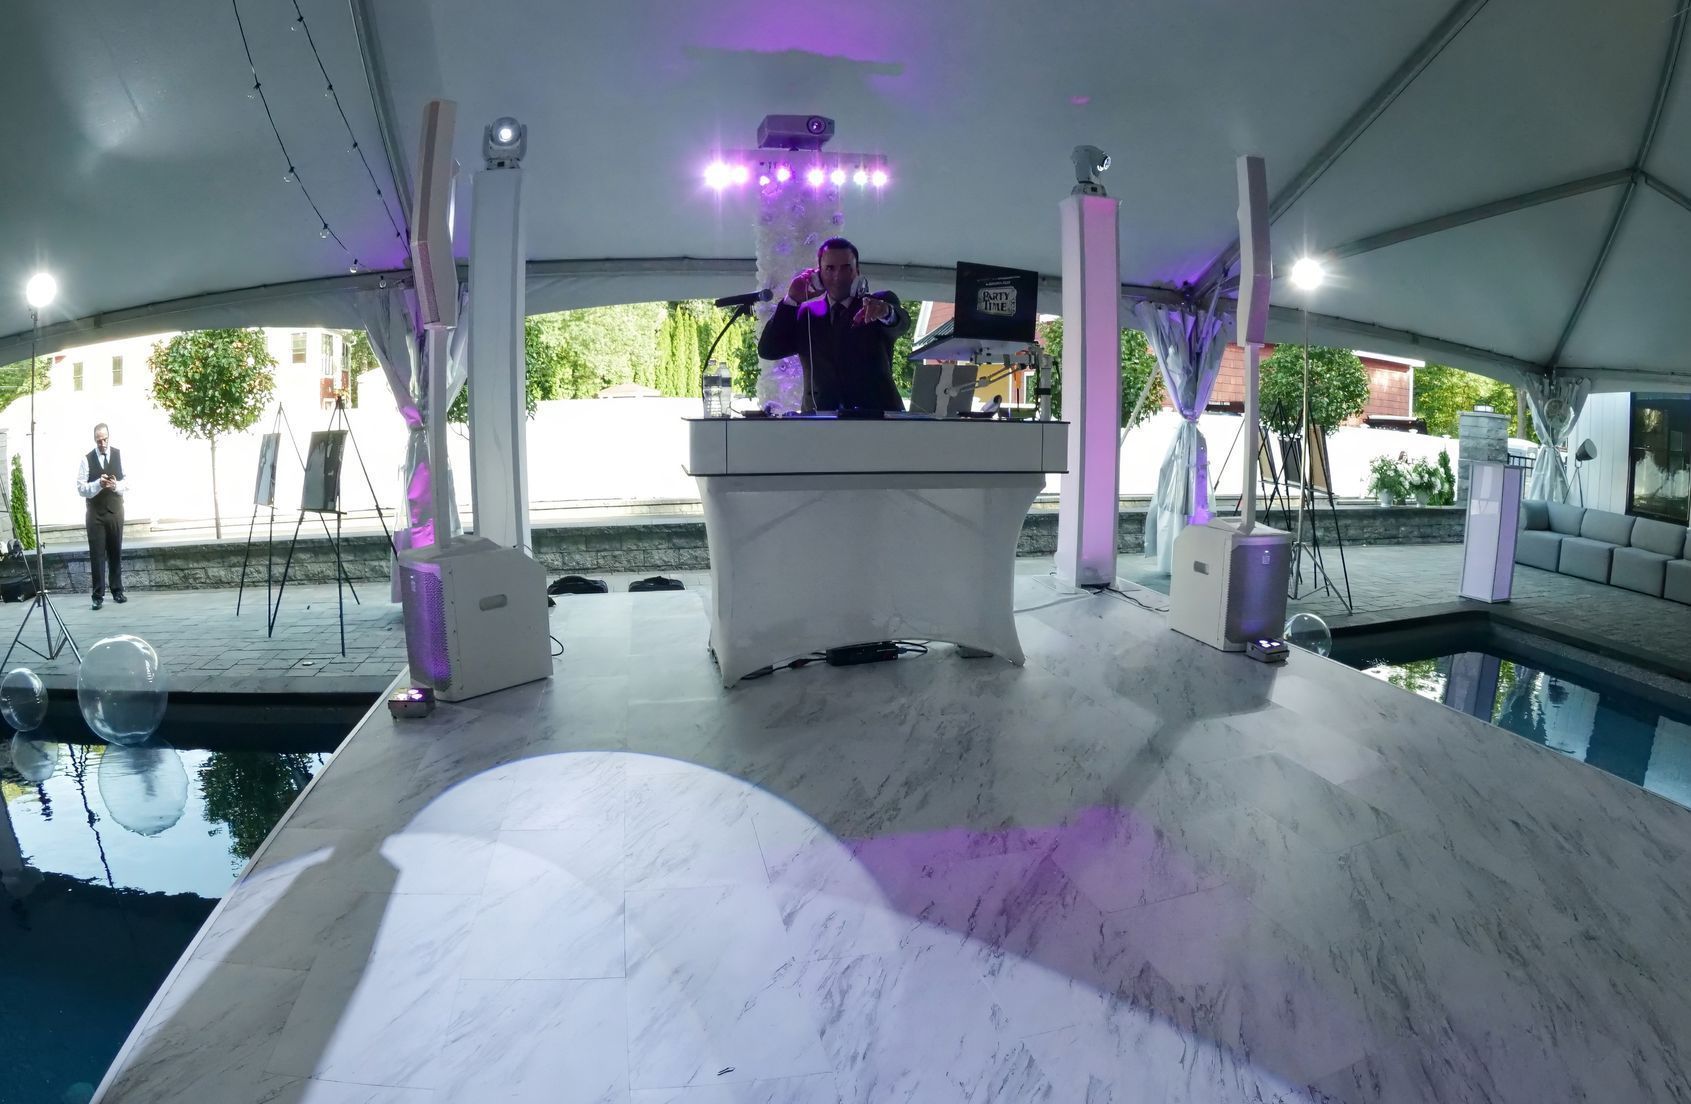 A dj is playing music in a tent next to a pool.